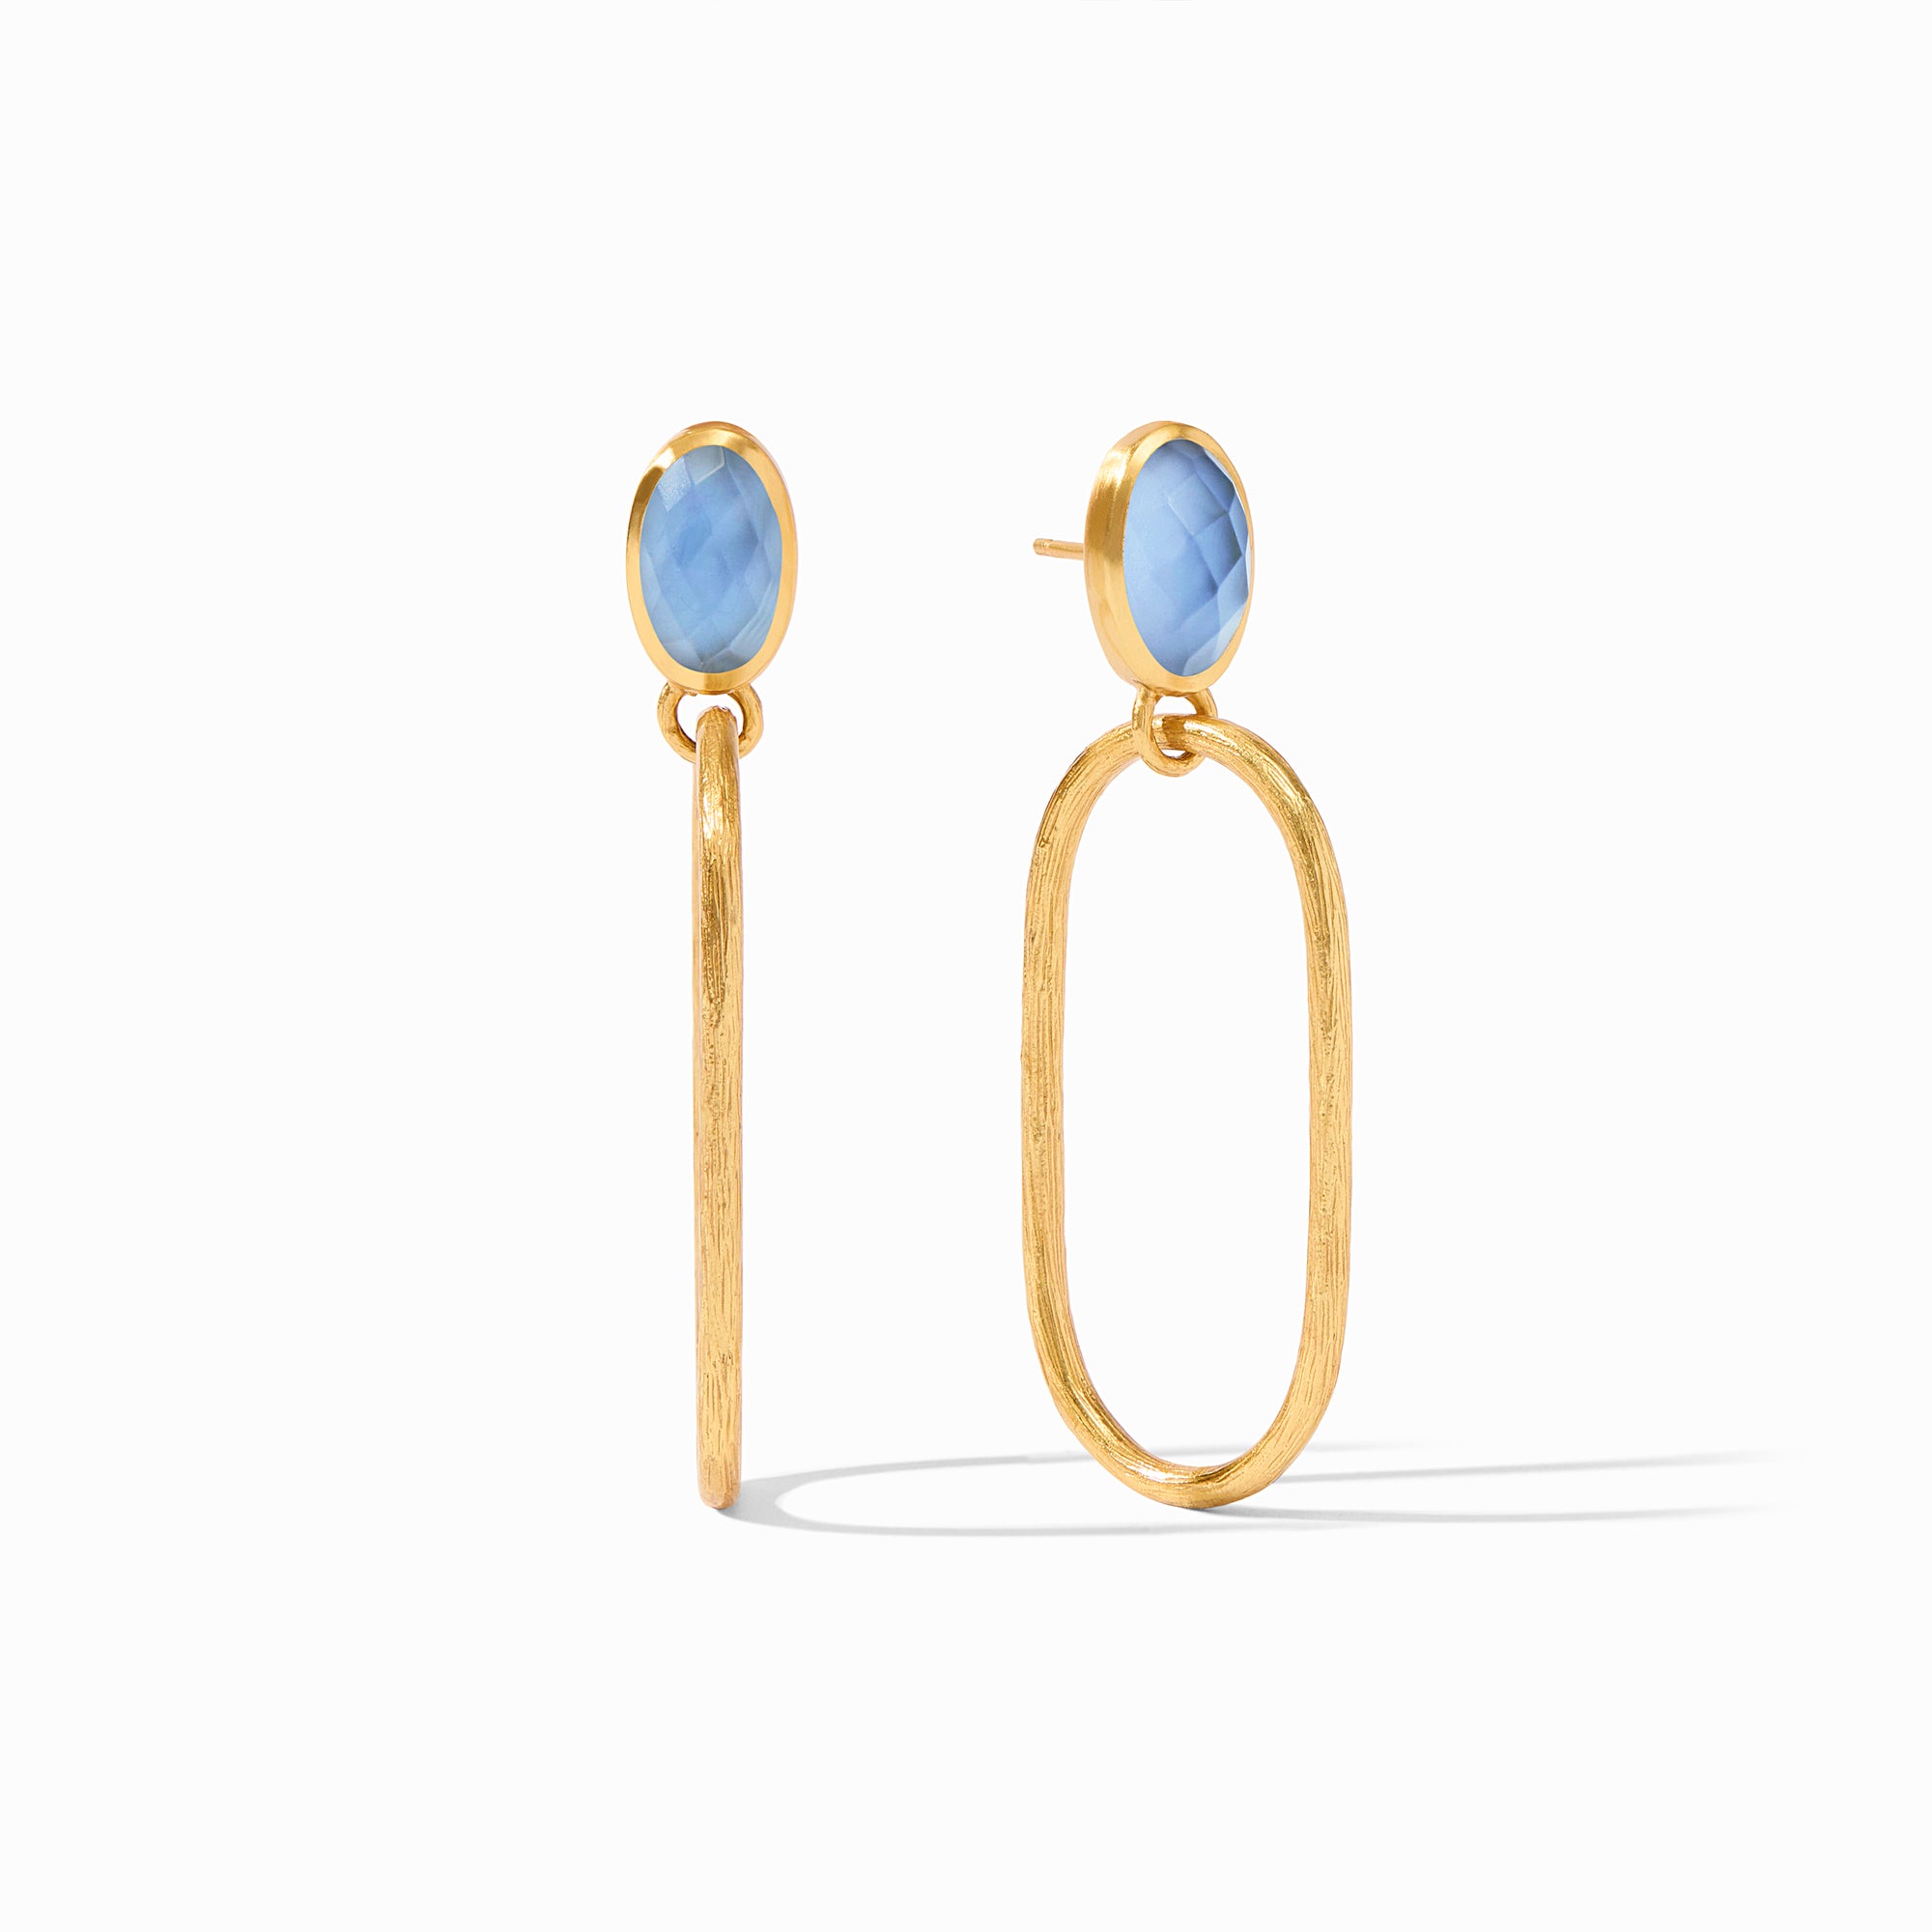 Julie Vos - Ivy Statement Earring, Iridescent Chalcedony Blue